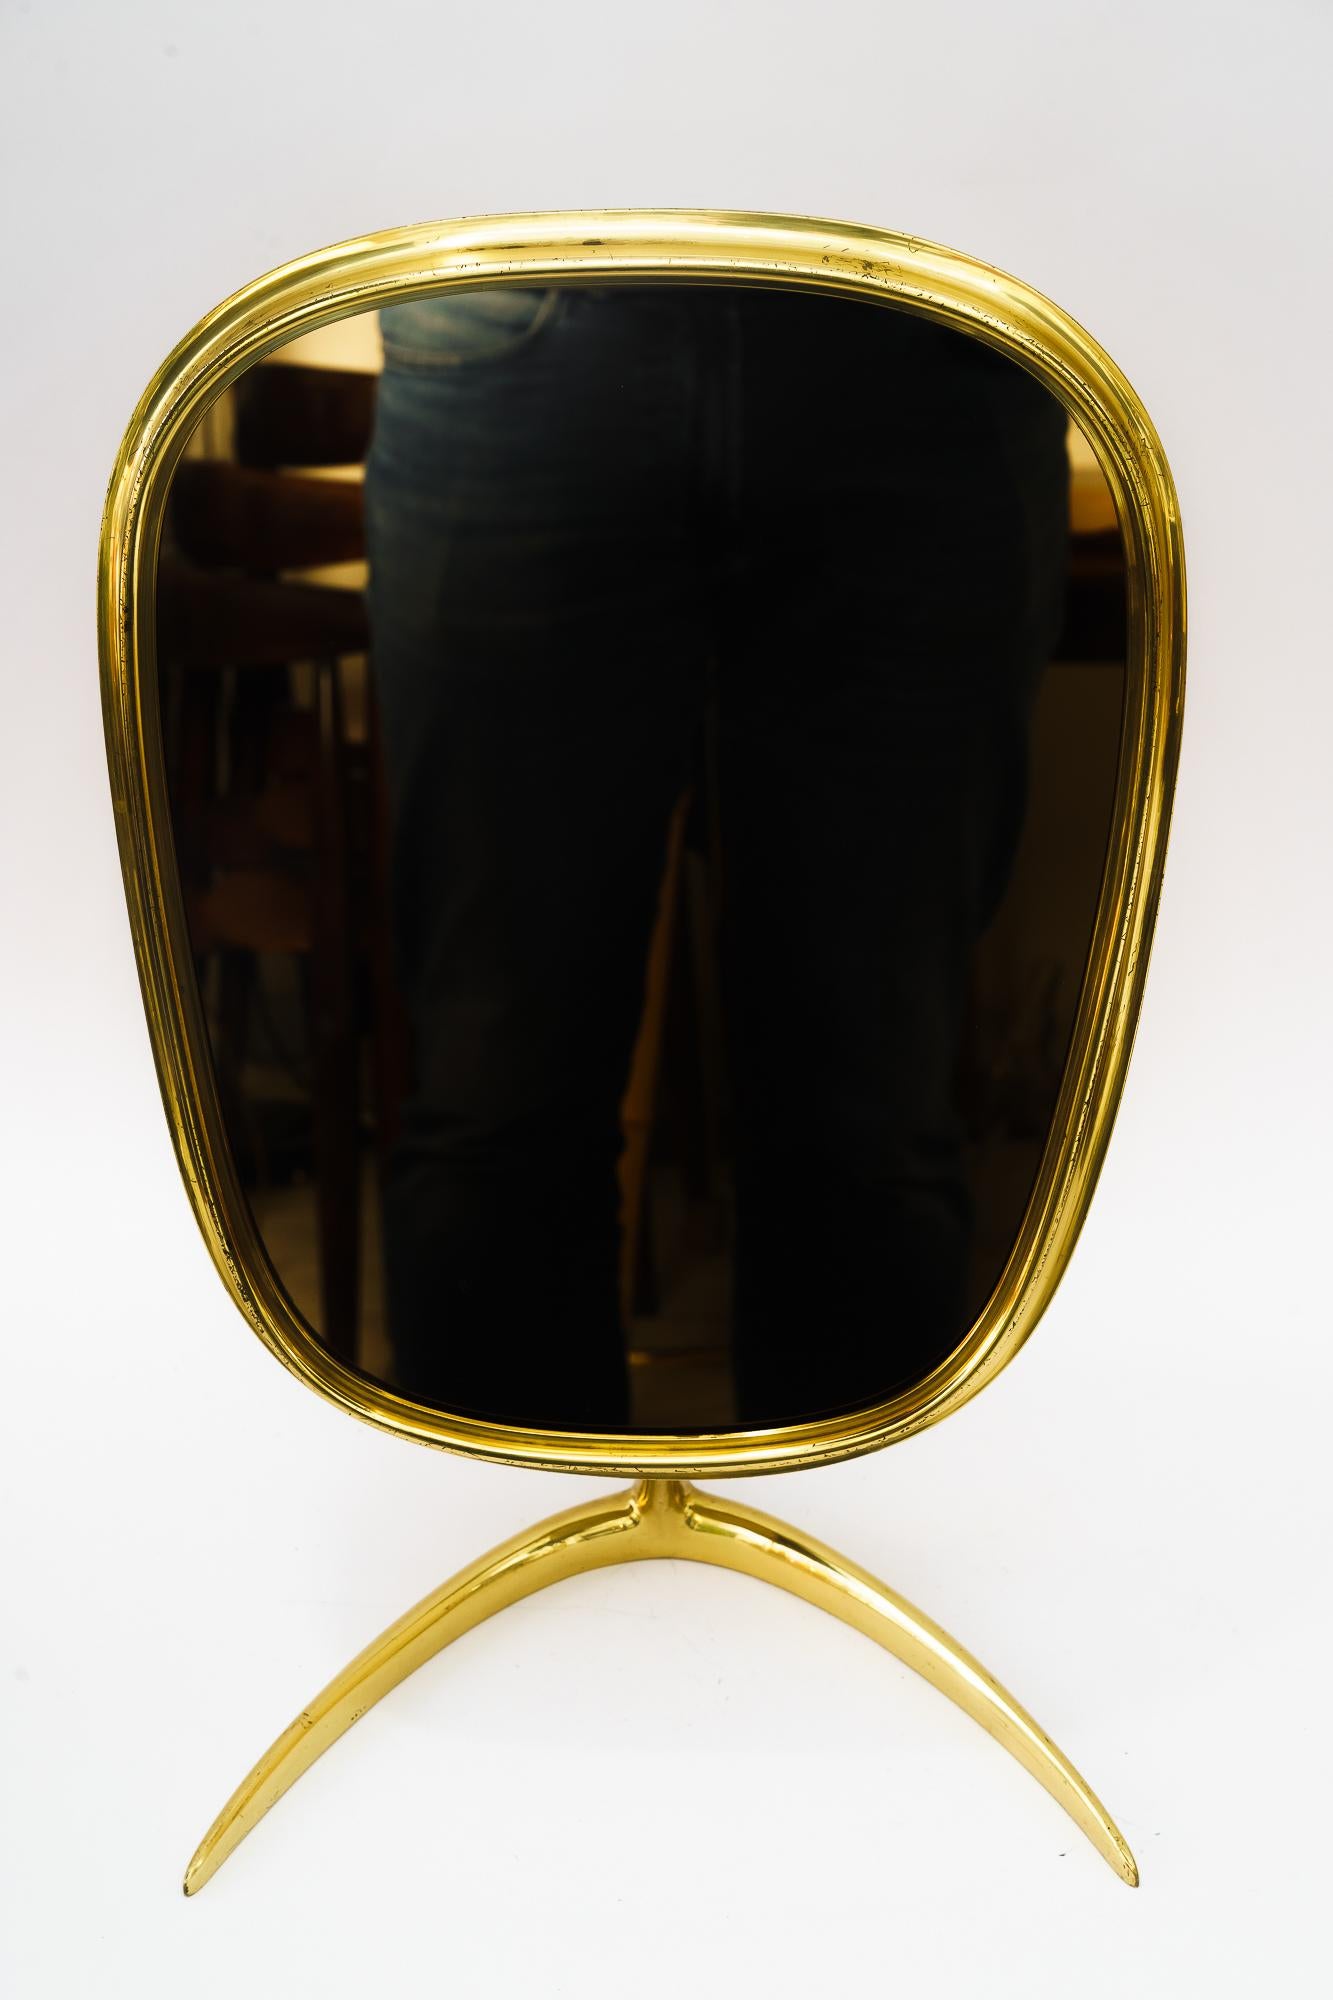 This original midcentury table mirror was produced in the 1950s in Germany by the Vereinigte Werkstätten München. 
Brass metal base and brass mirror glass frame at the top. 
Minimalistic design of the 1950s. 
Original condition